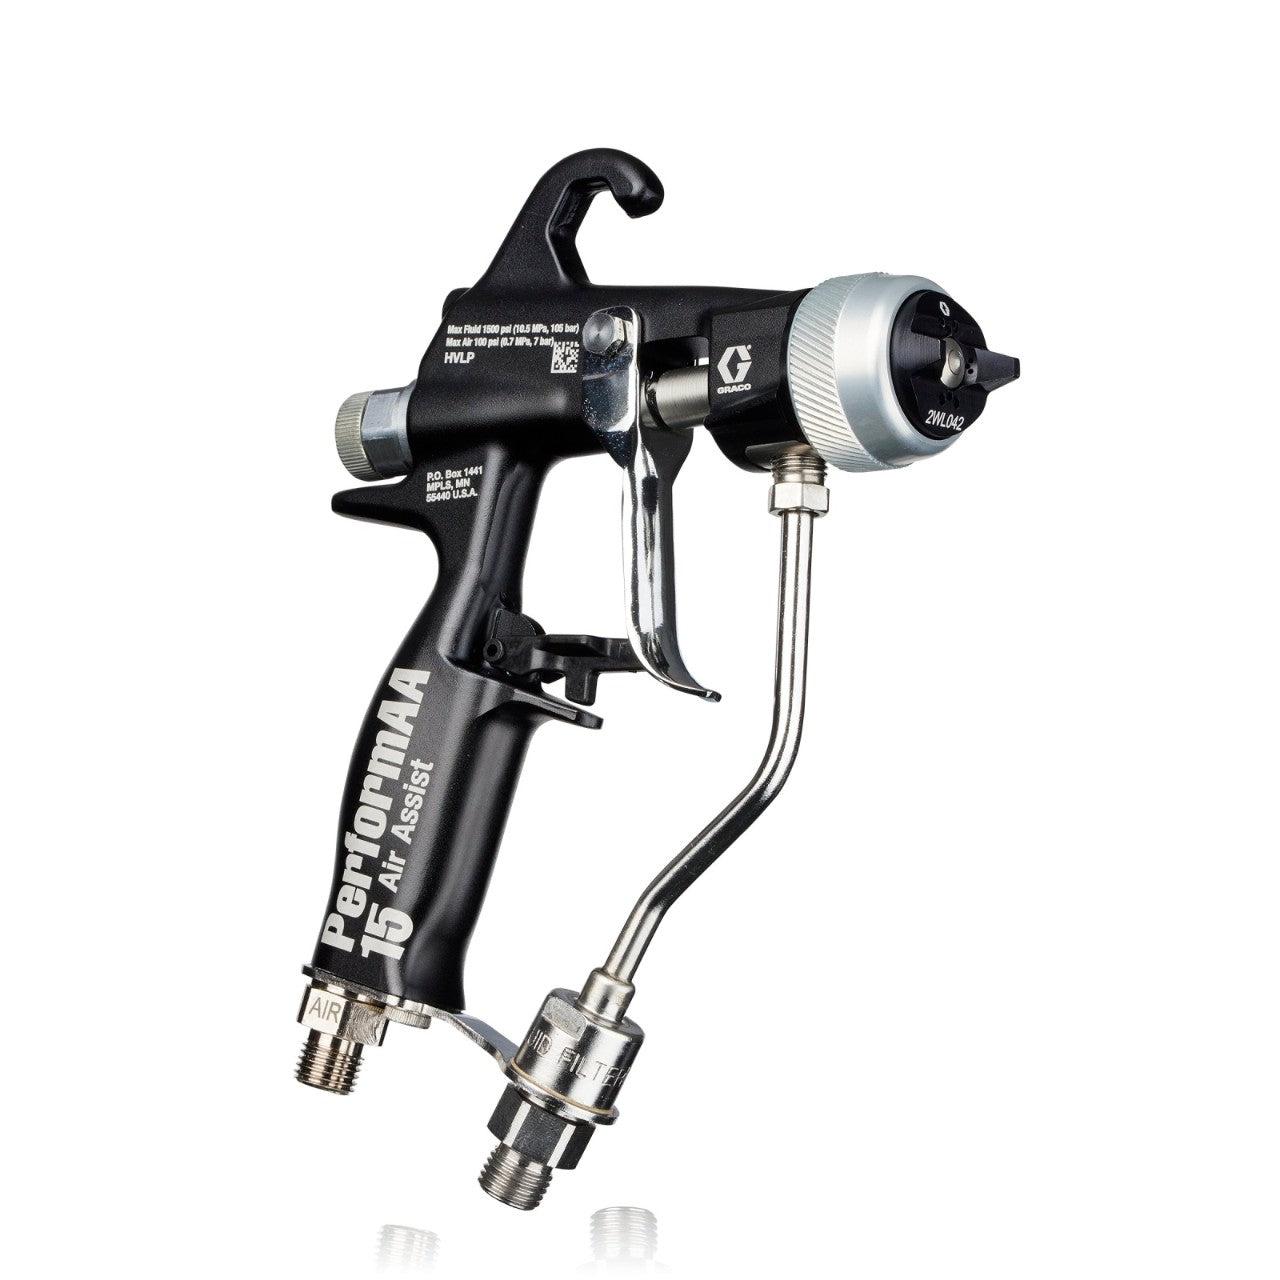 PerformAA 1500 Air Assist Gun with Wood Lacquer air cap, light trigger pull and fluid swivel